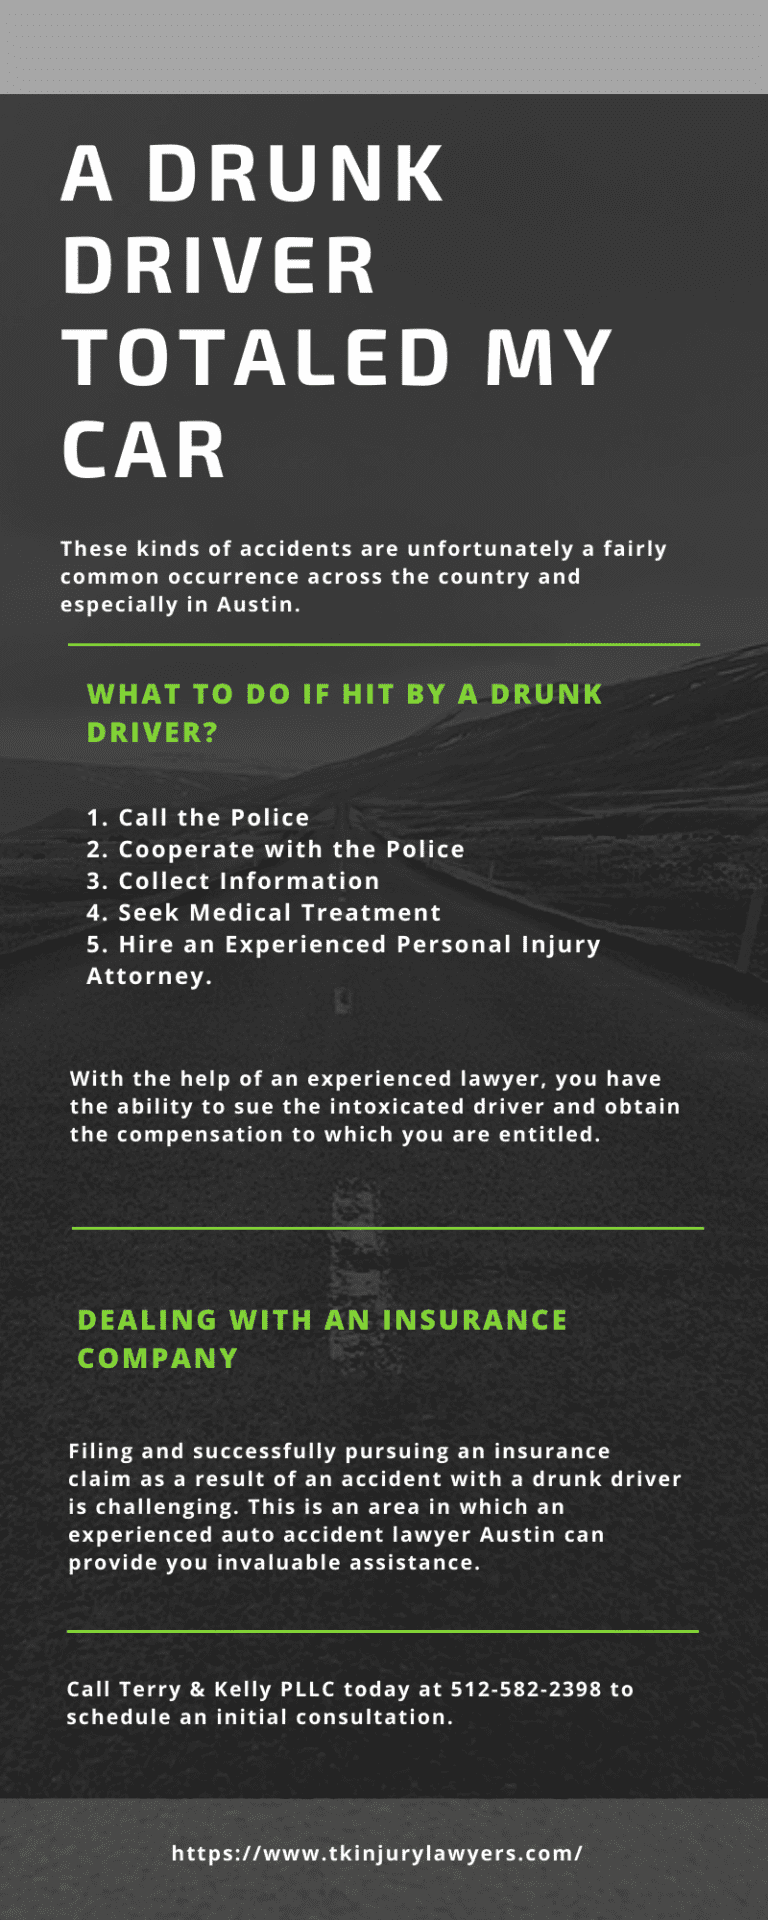 infographic - Drunk Driver